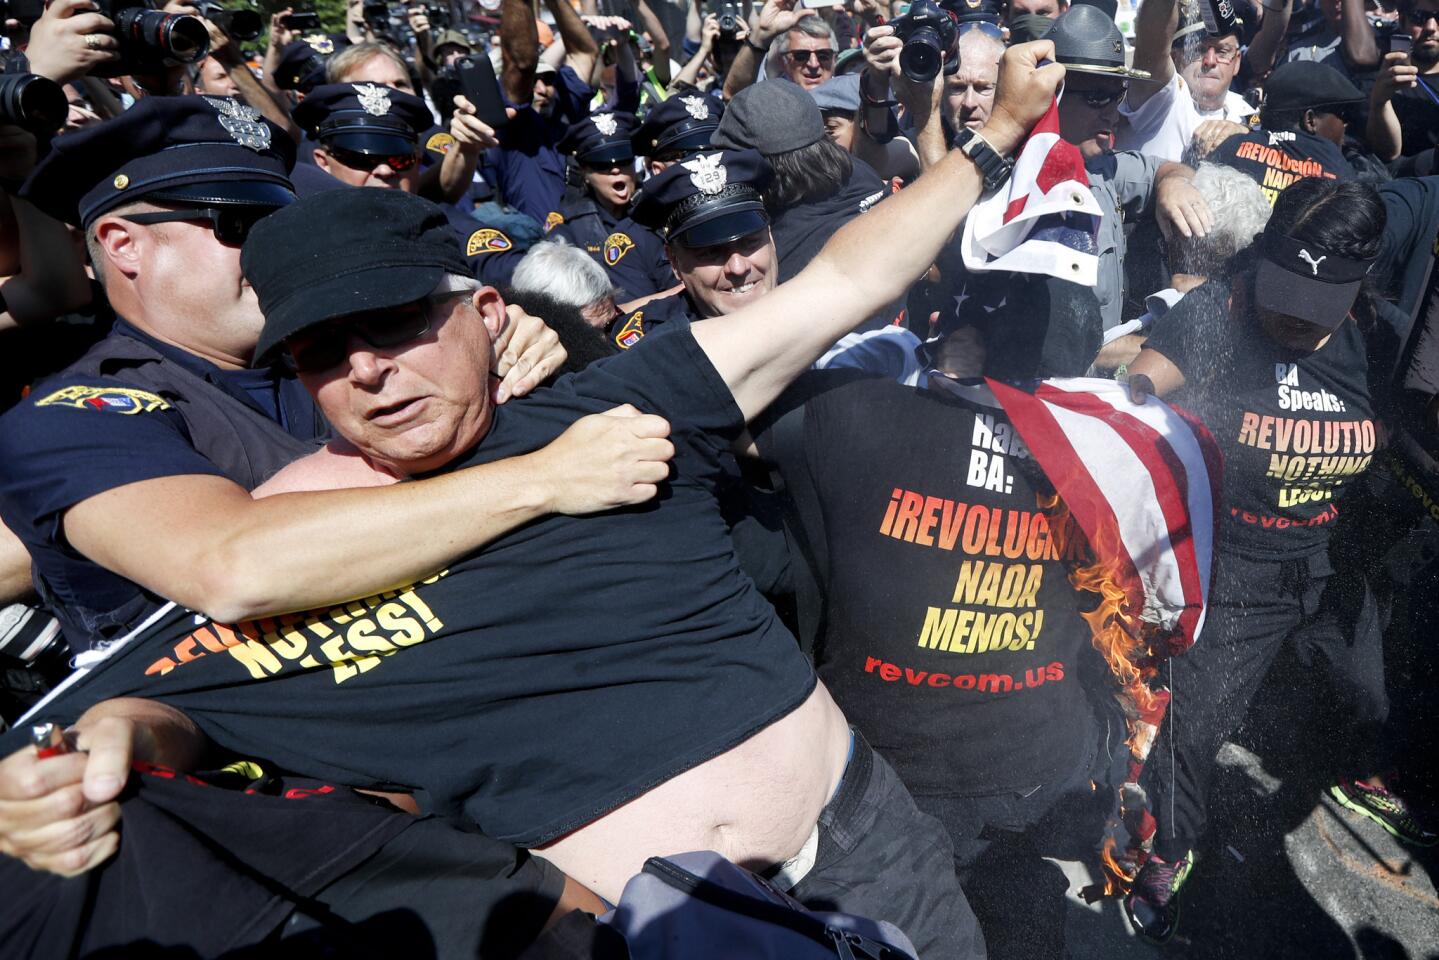 A law enforcement officer clashes with a protester holding a burning American flag, Wednesday, July 20, 2016, in Cleveland, during the third day of the Republican convention.